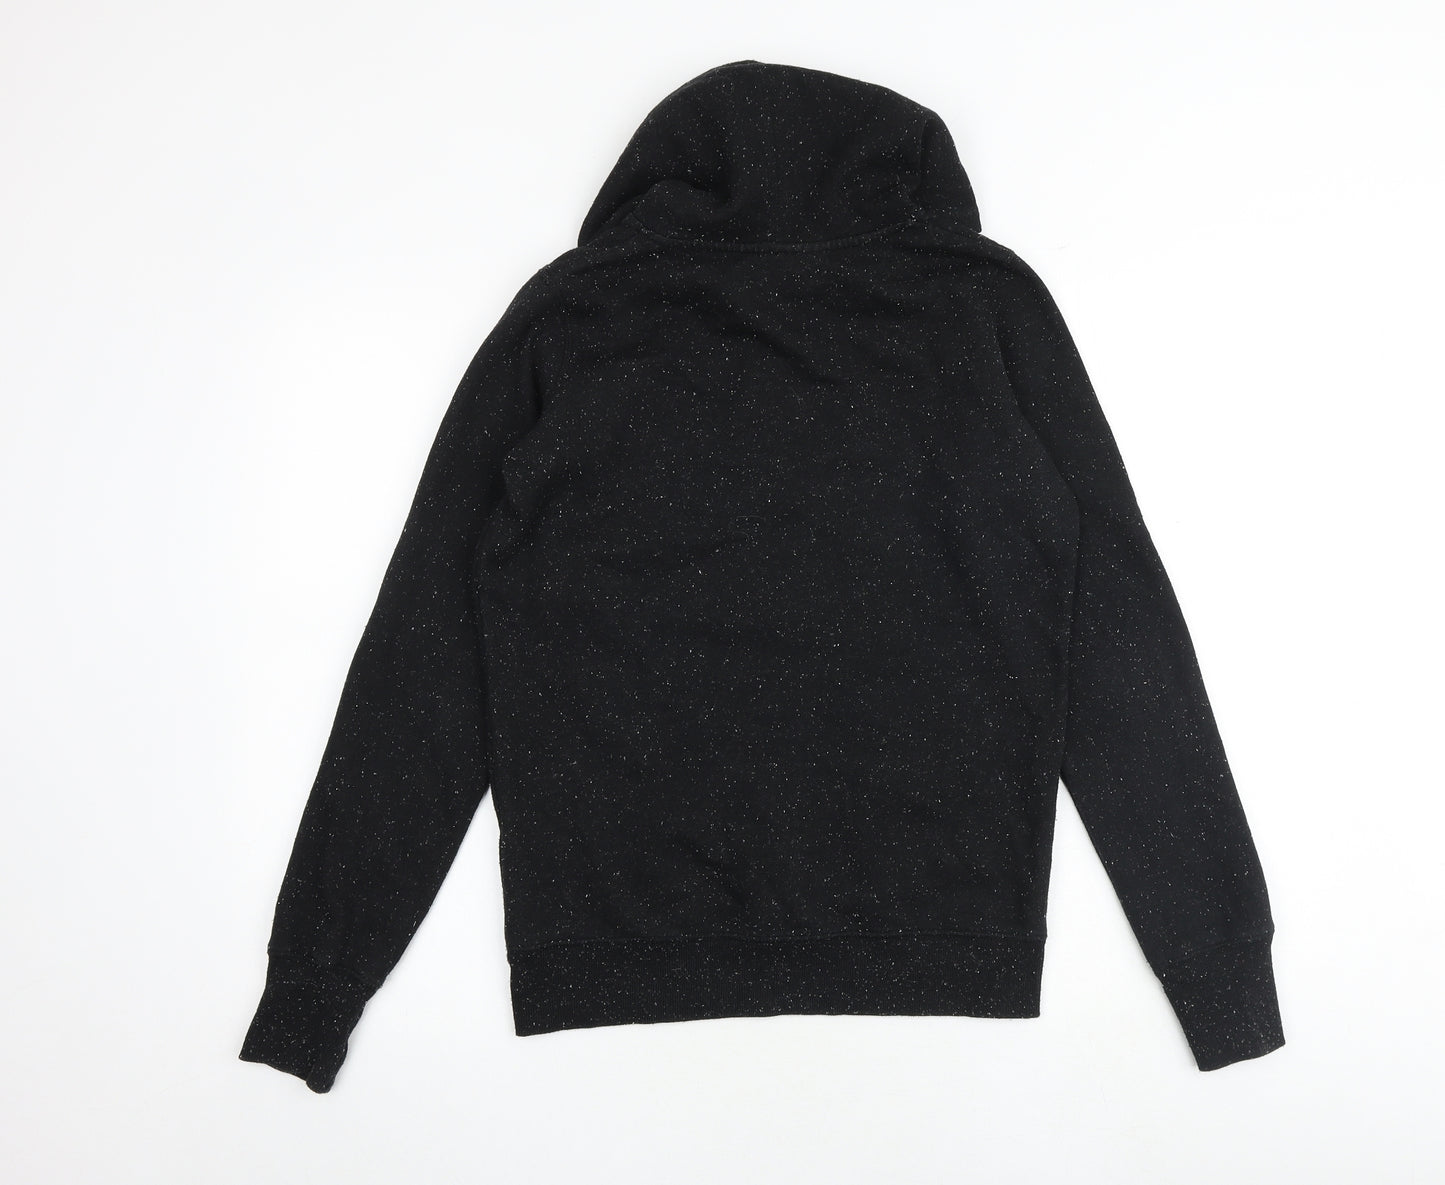 Cotton On Womens Black Polyester Pullover Hoodie Size S Pullover - Coffee is the new black